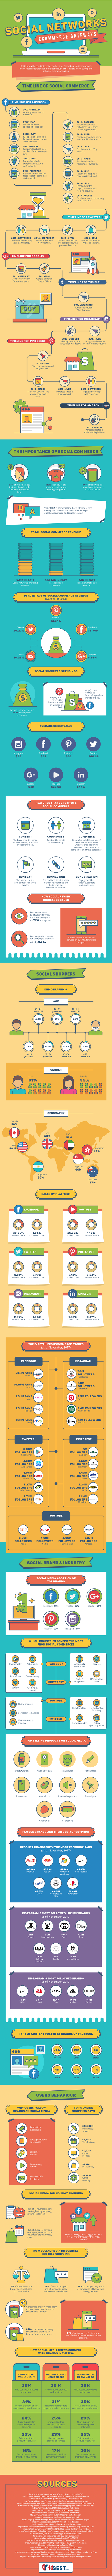 rise of social commerce infographic